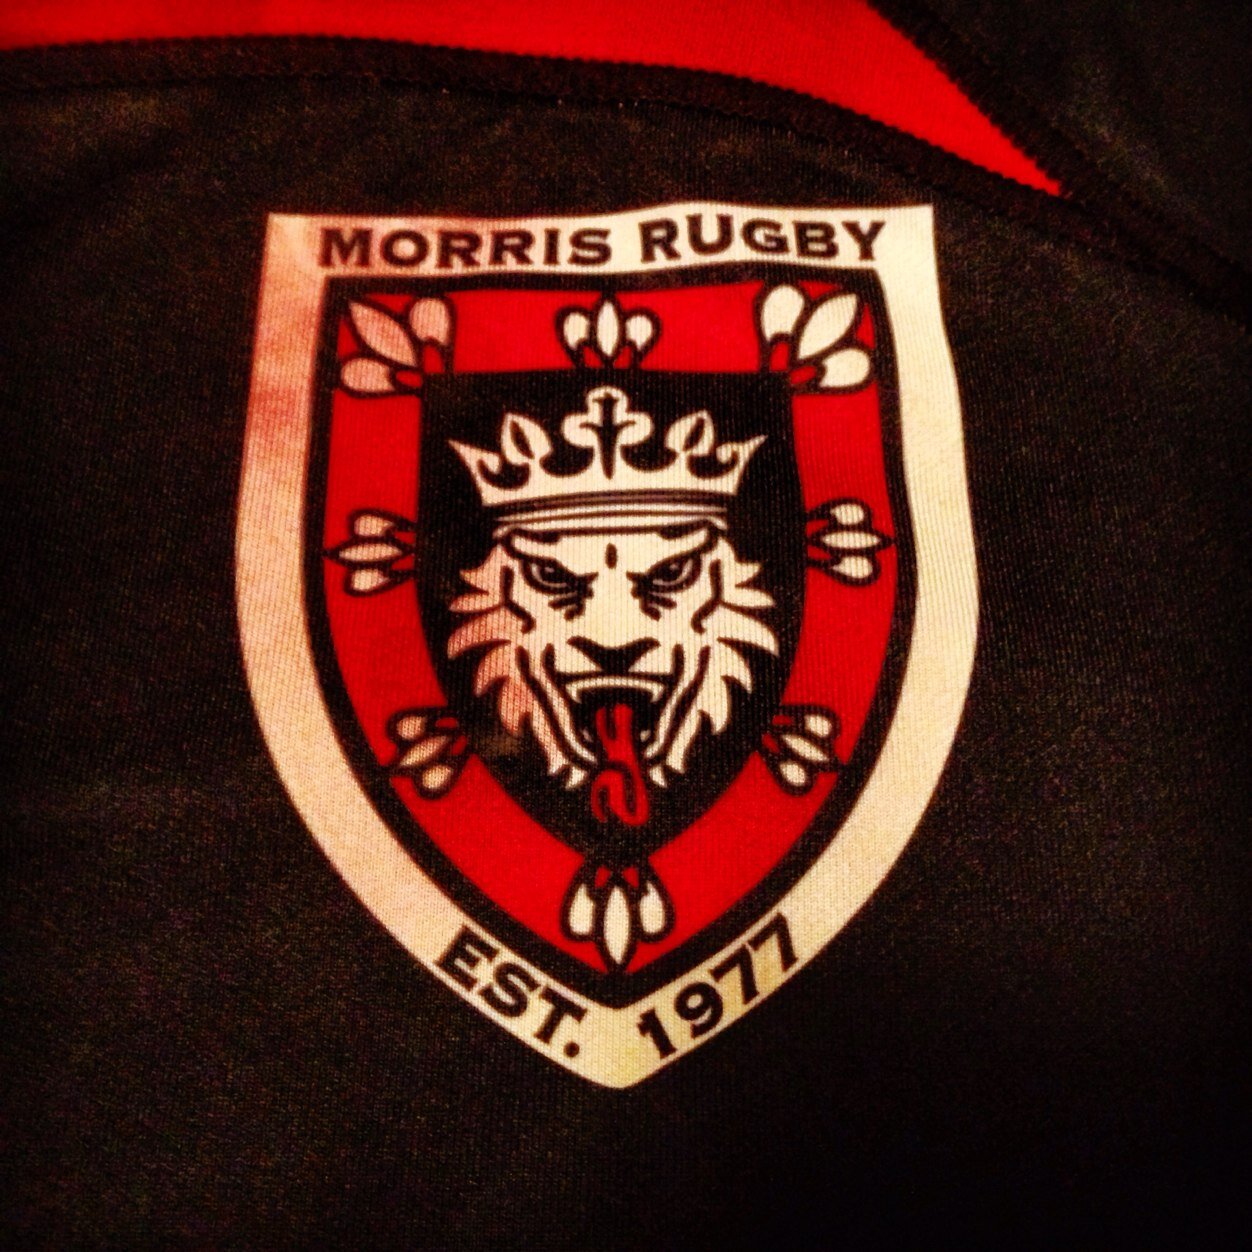 The Morris Rugby Corporation serves as the proactive organizing and governing body for men's and women's Rugby in the County of Morris, New Jersey, USA.